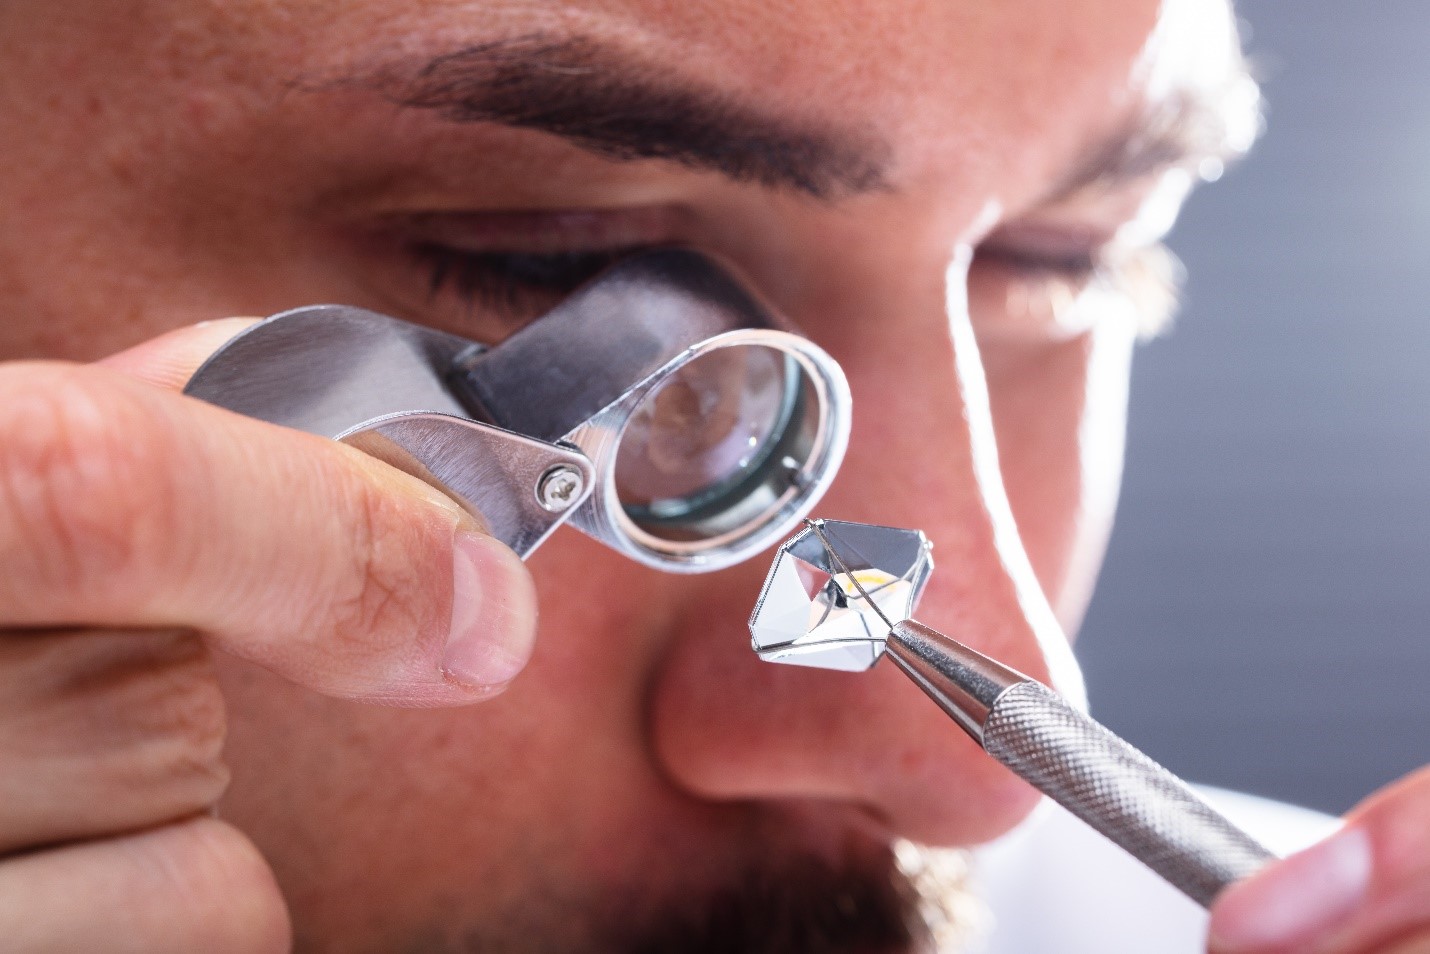 A gemologist examines the clarity of a diamond using a loupe